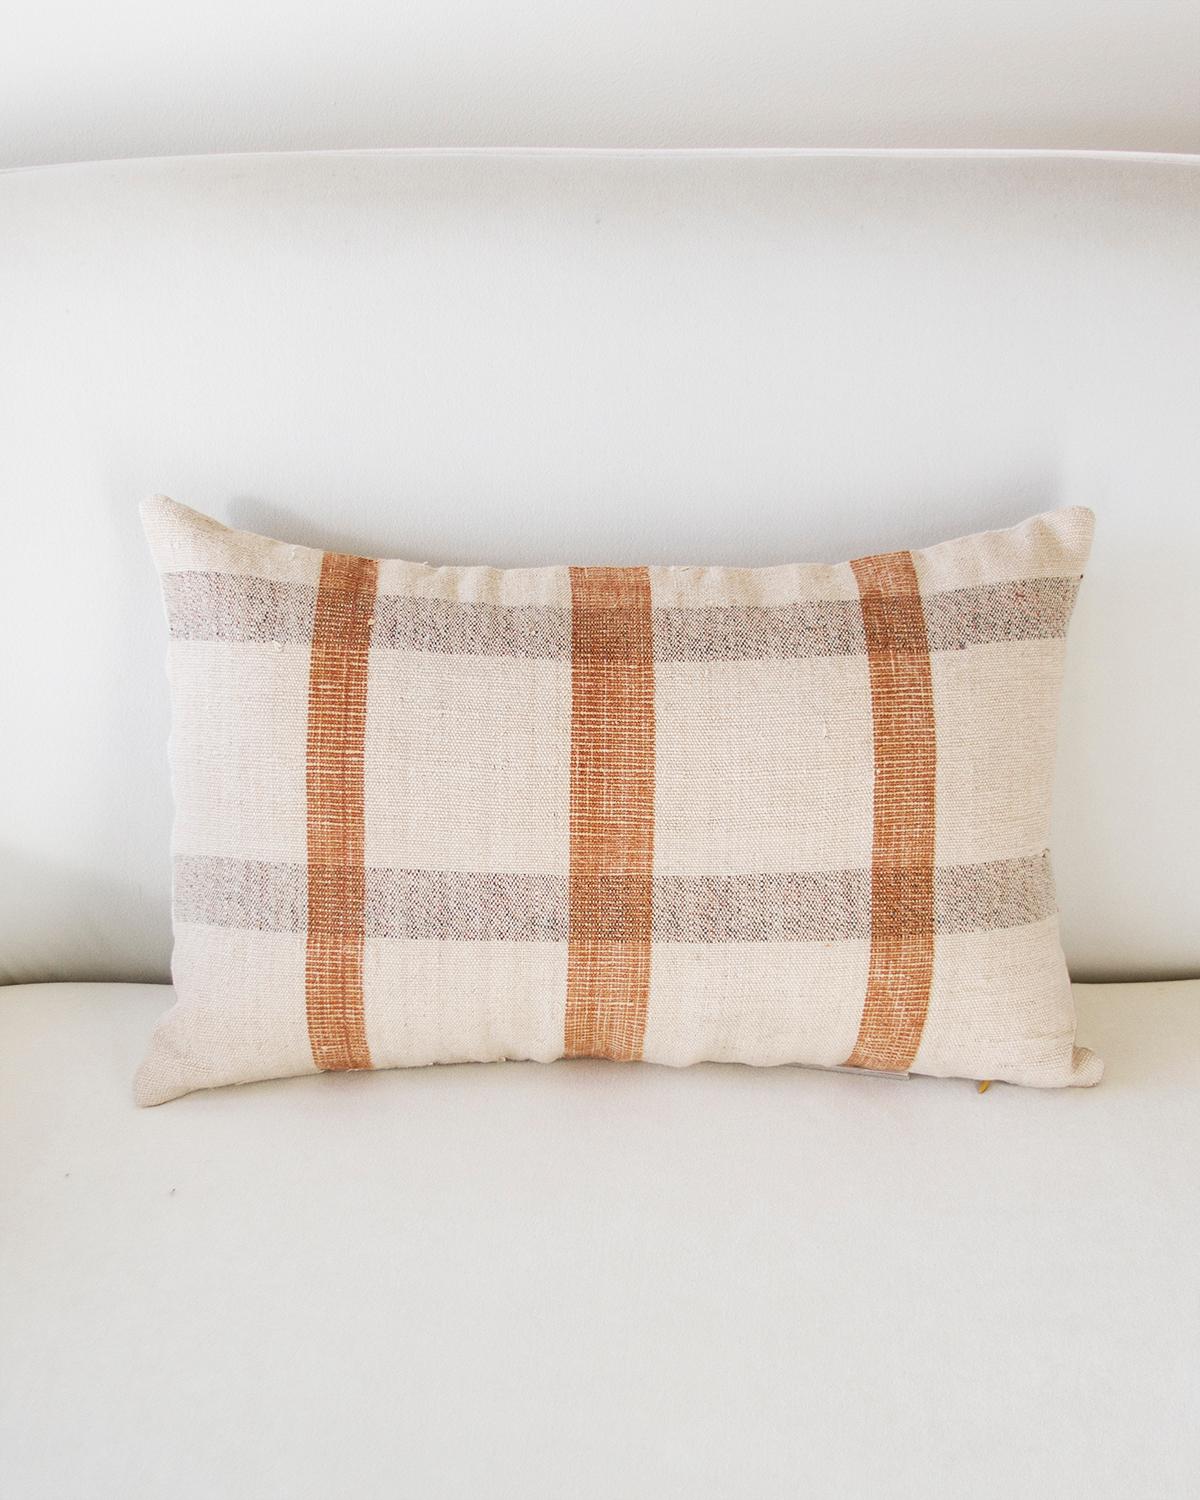 Rustic Matilde Brick Checkered Lumbar Throw Pillow made from Vintage Linen For Sale